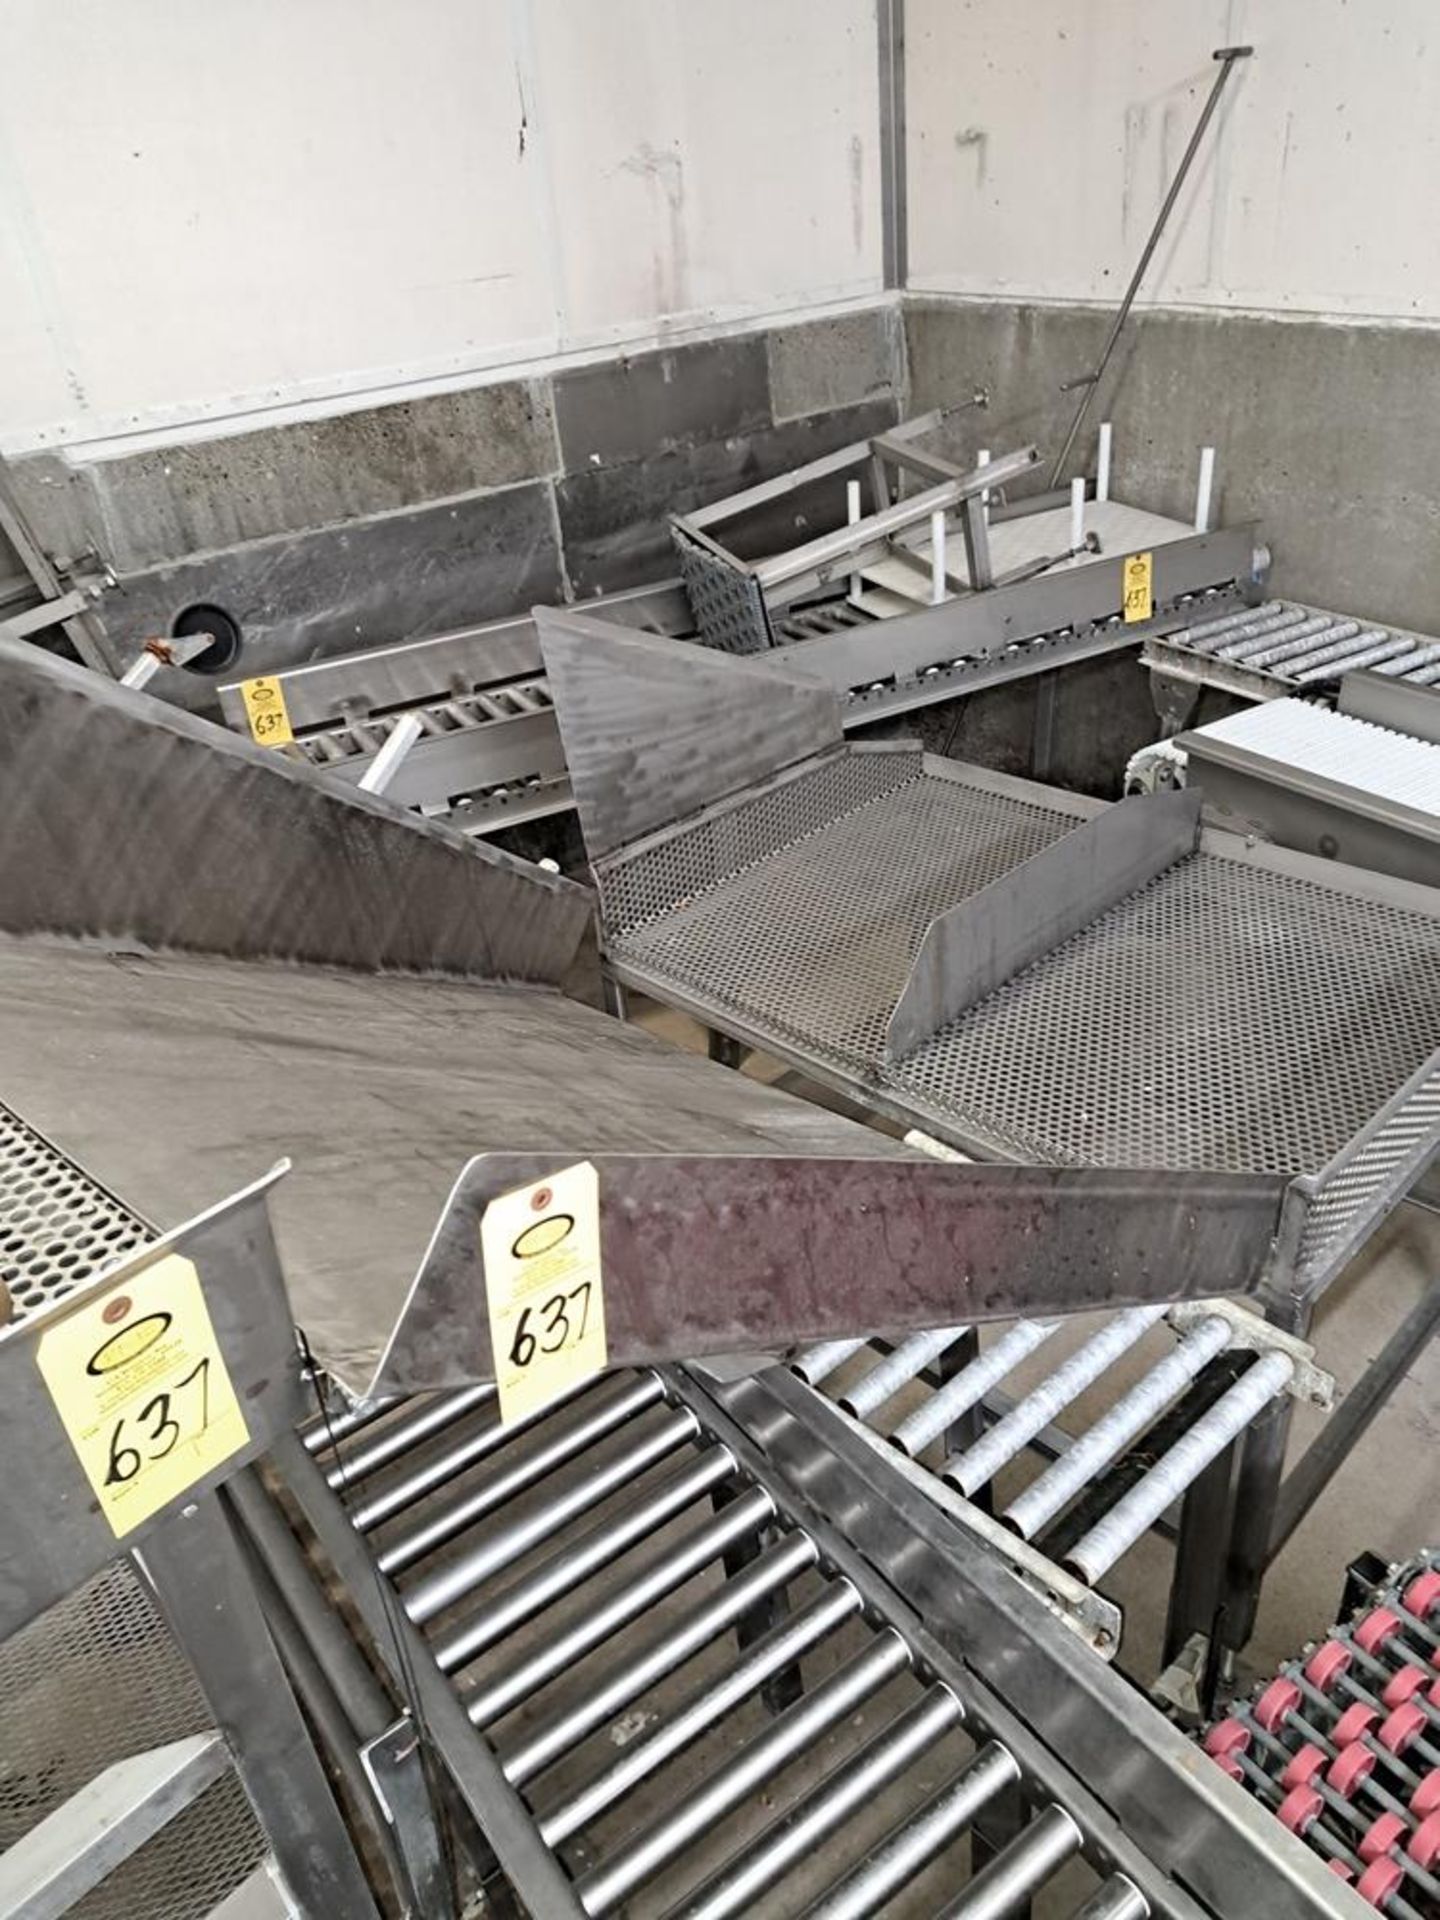 Lot Roller Conveyor, Stainless Steel Processing Bins with chutes, Stainless Steel Platform, - Image 6 of 7